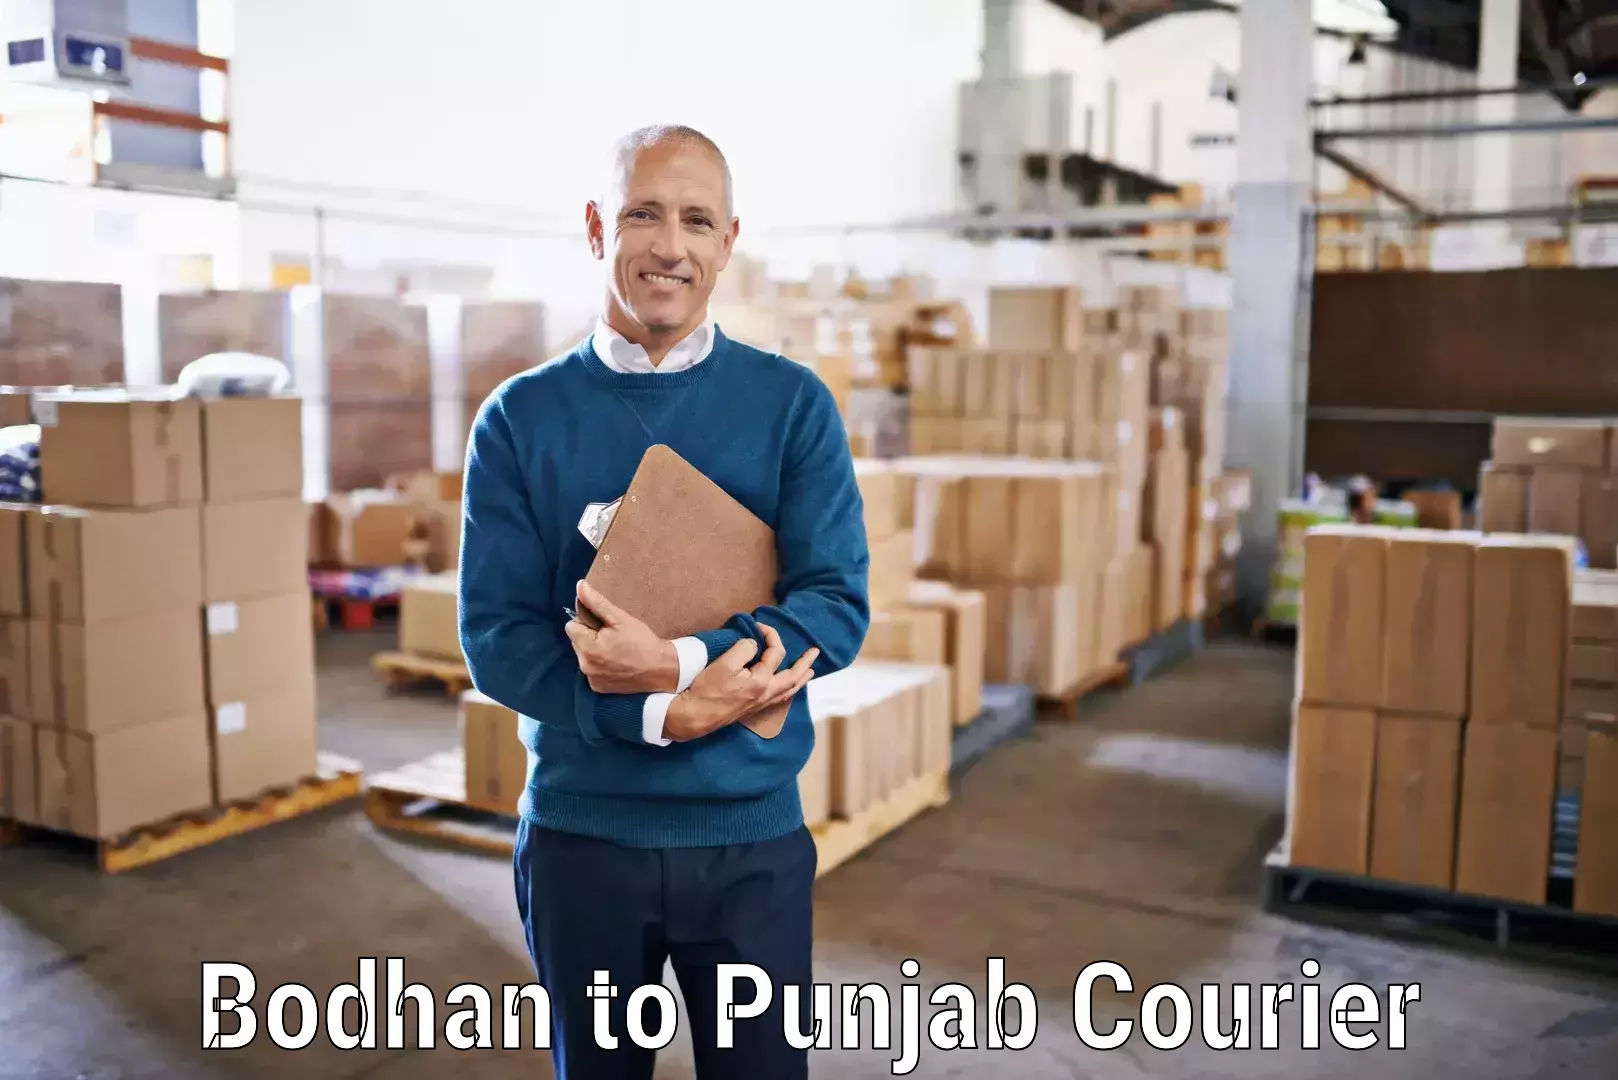 Cash on delivery service Bodhan to Pathankot